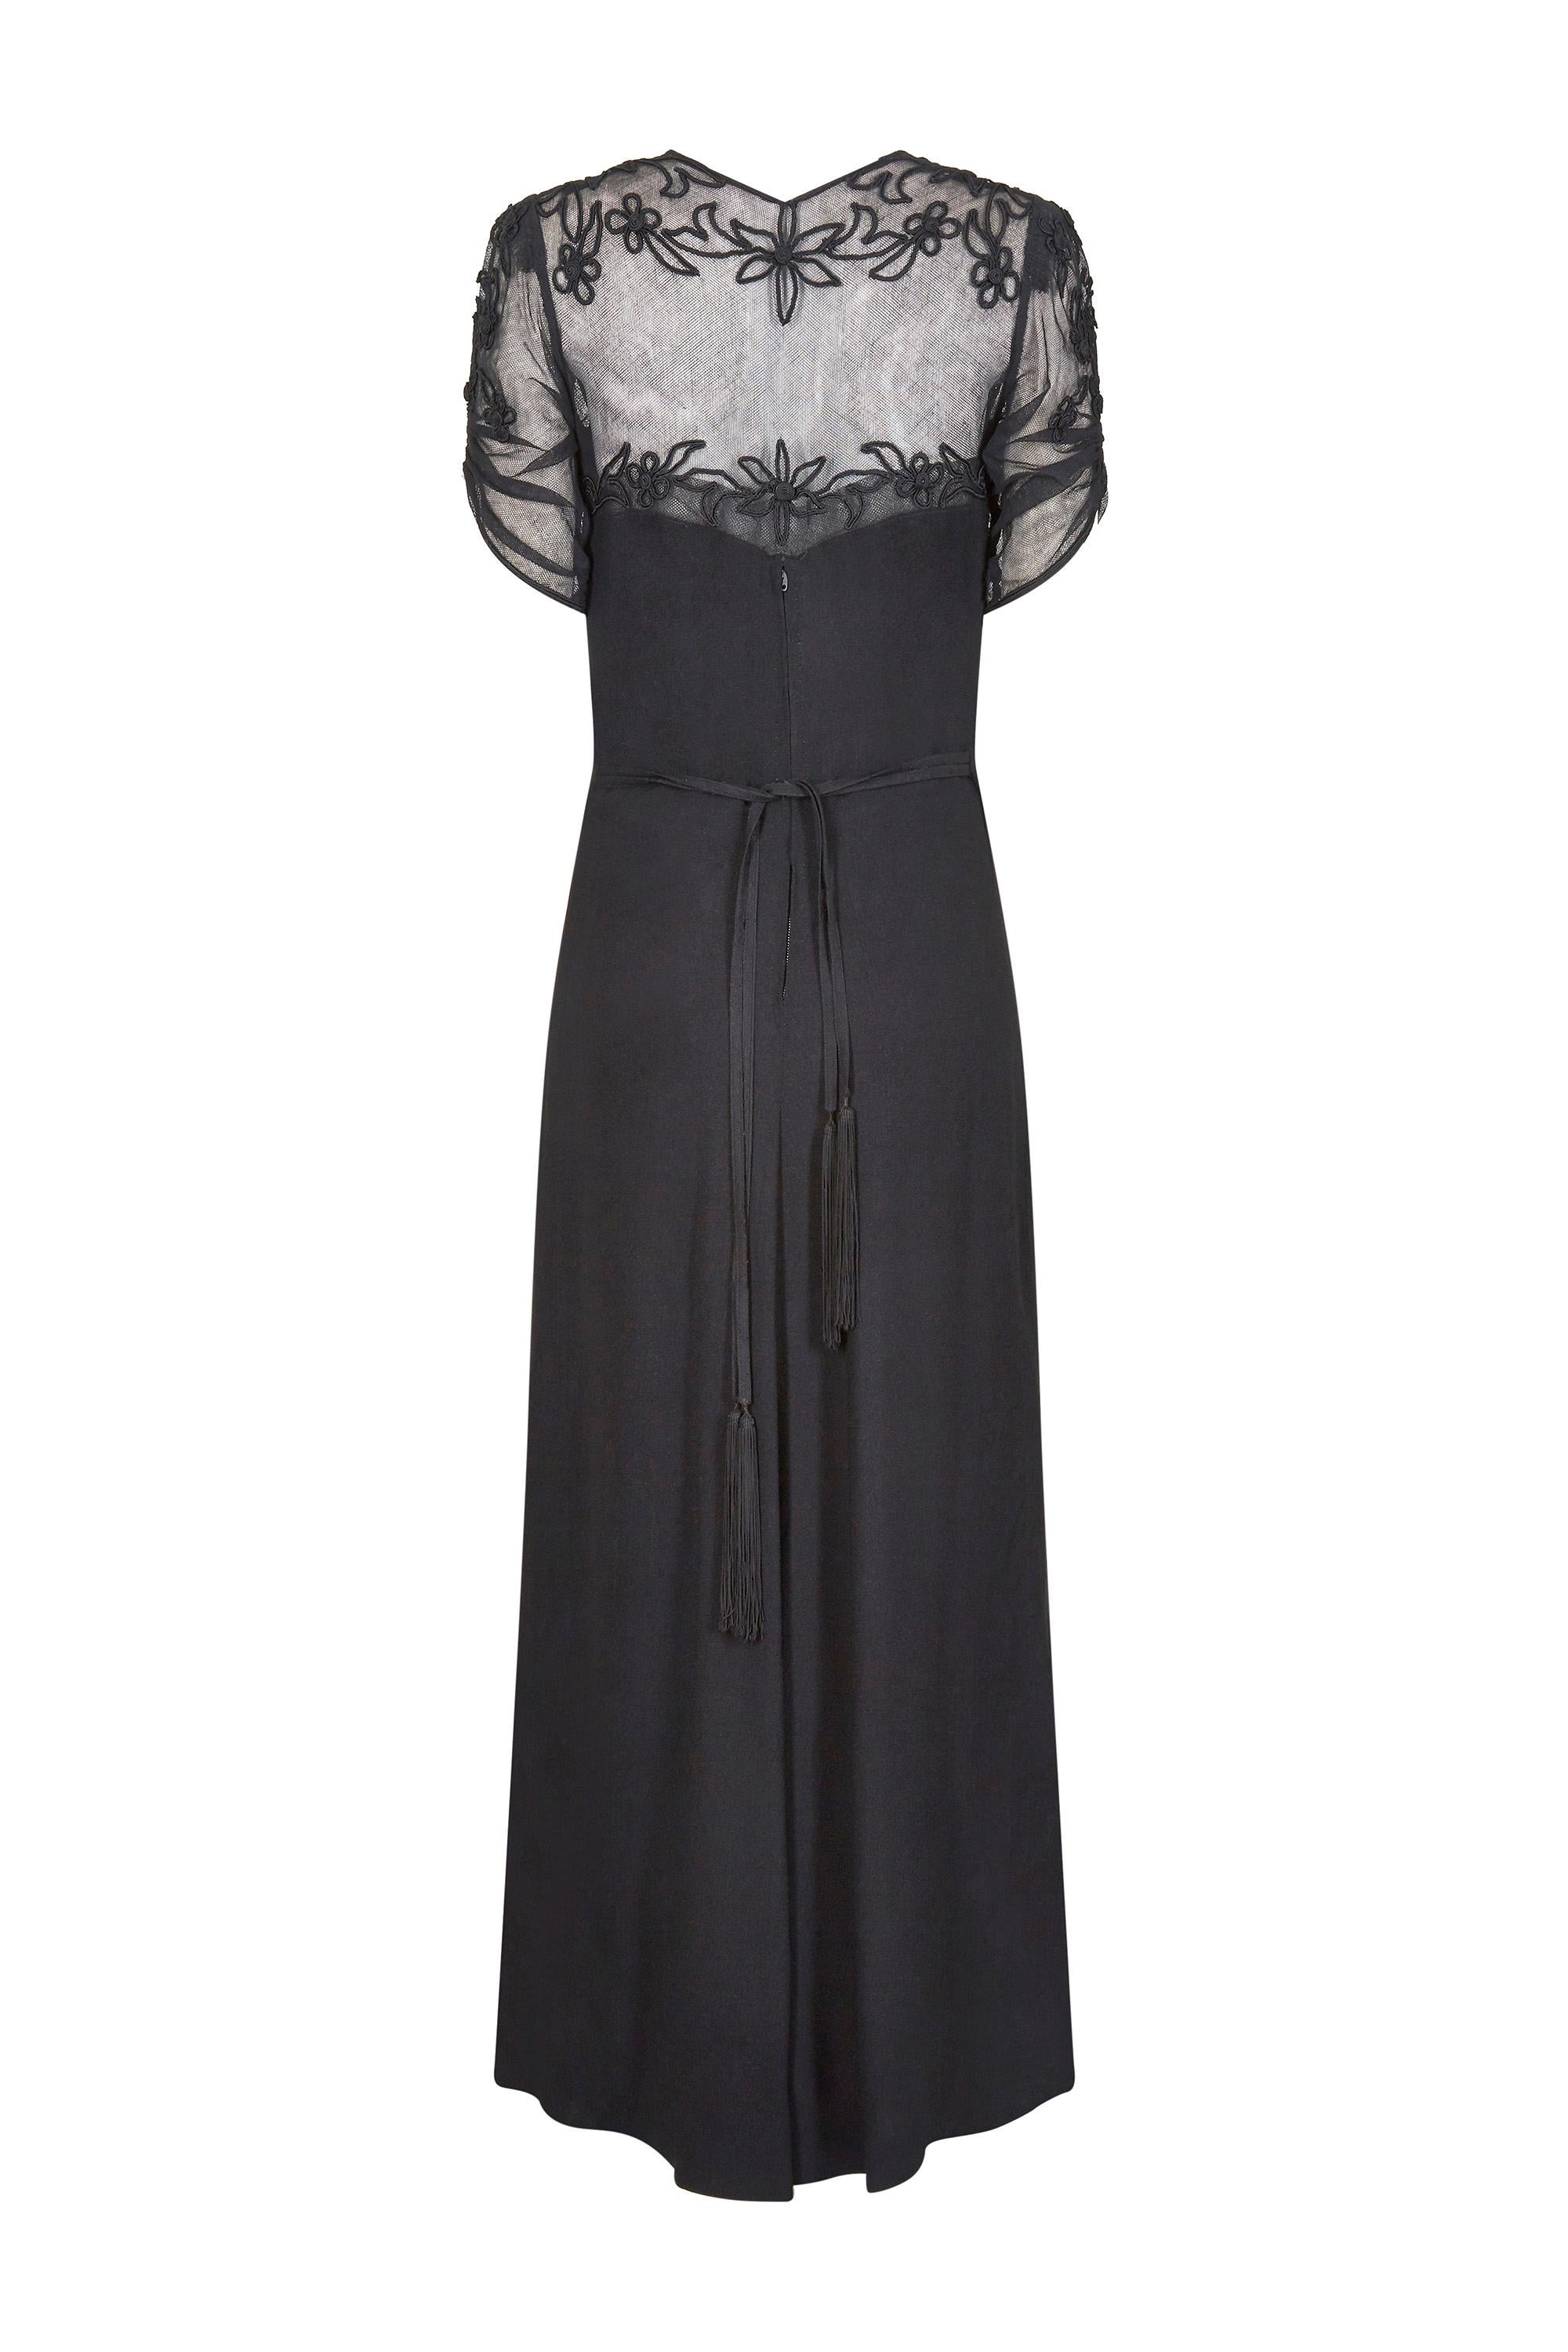 1930s Black Silk Crepe and Net Evening Dress With Floral Appliqué ...